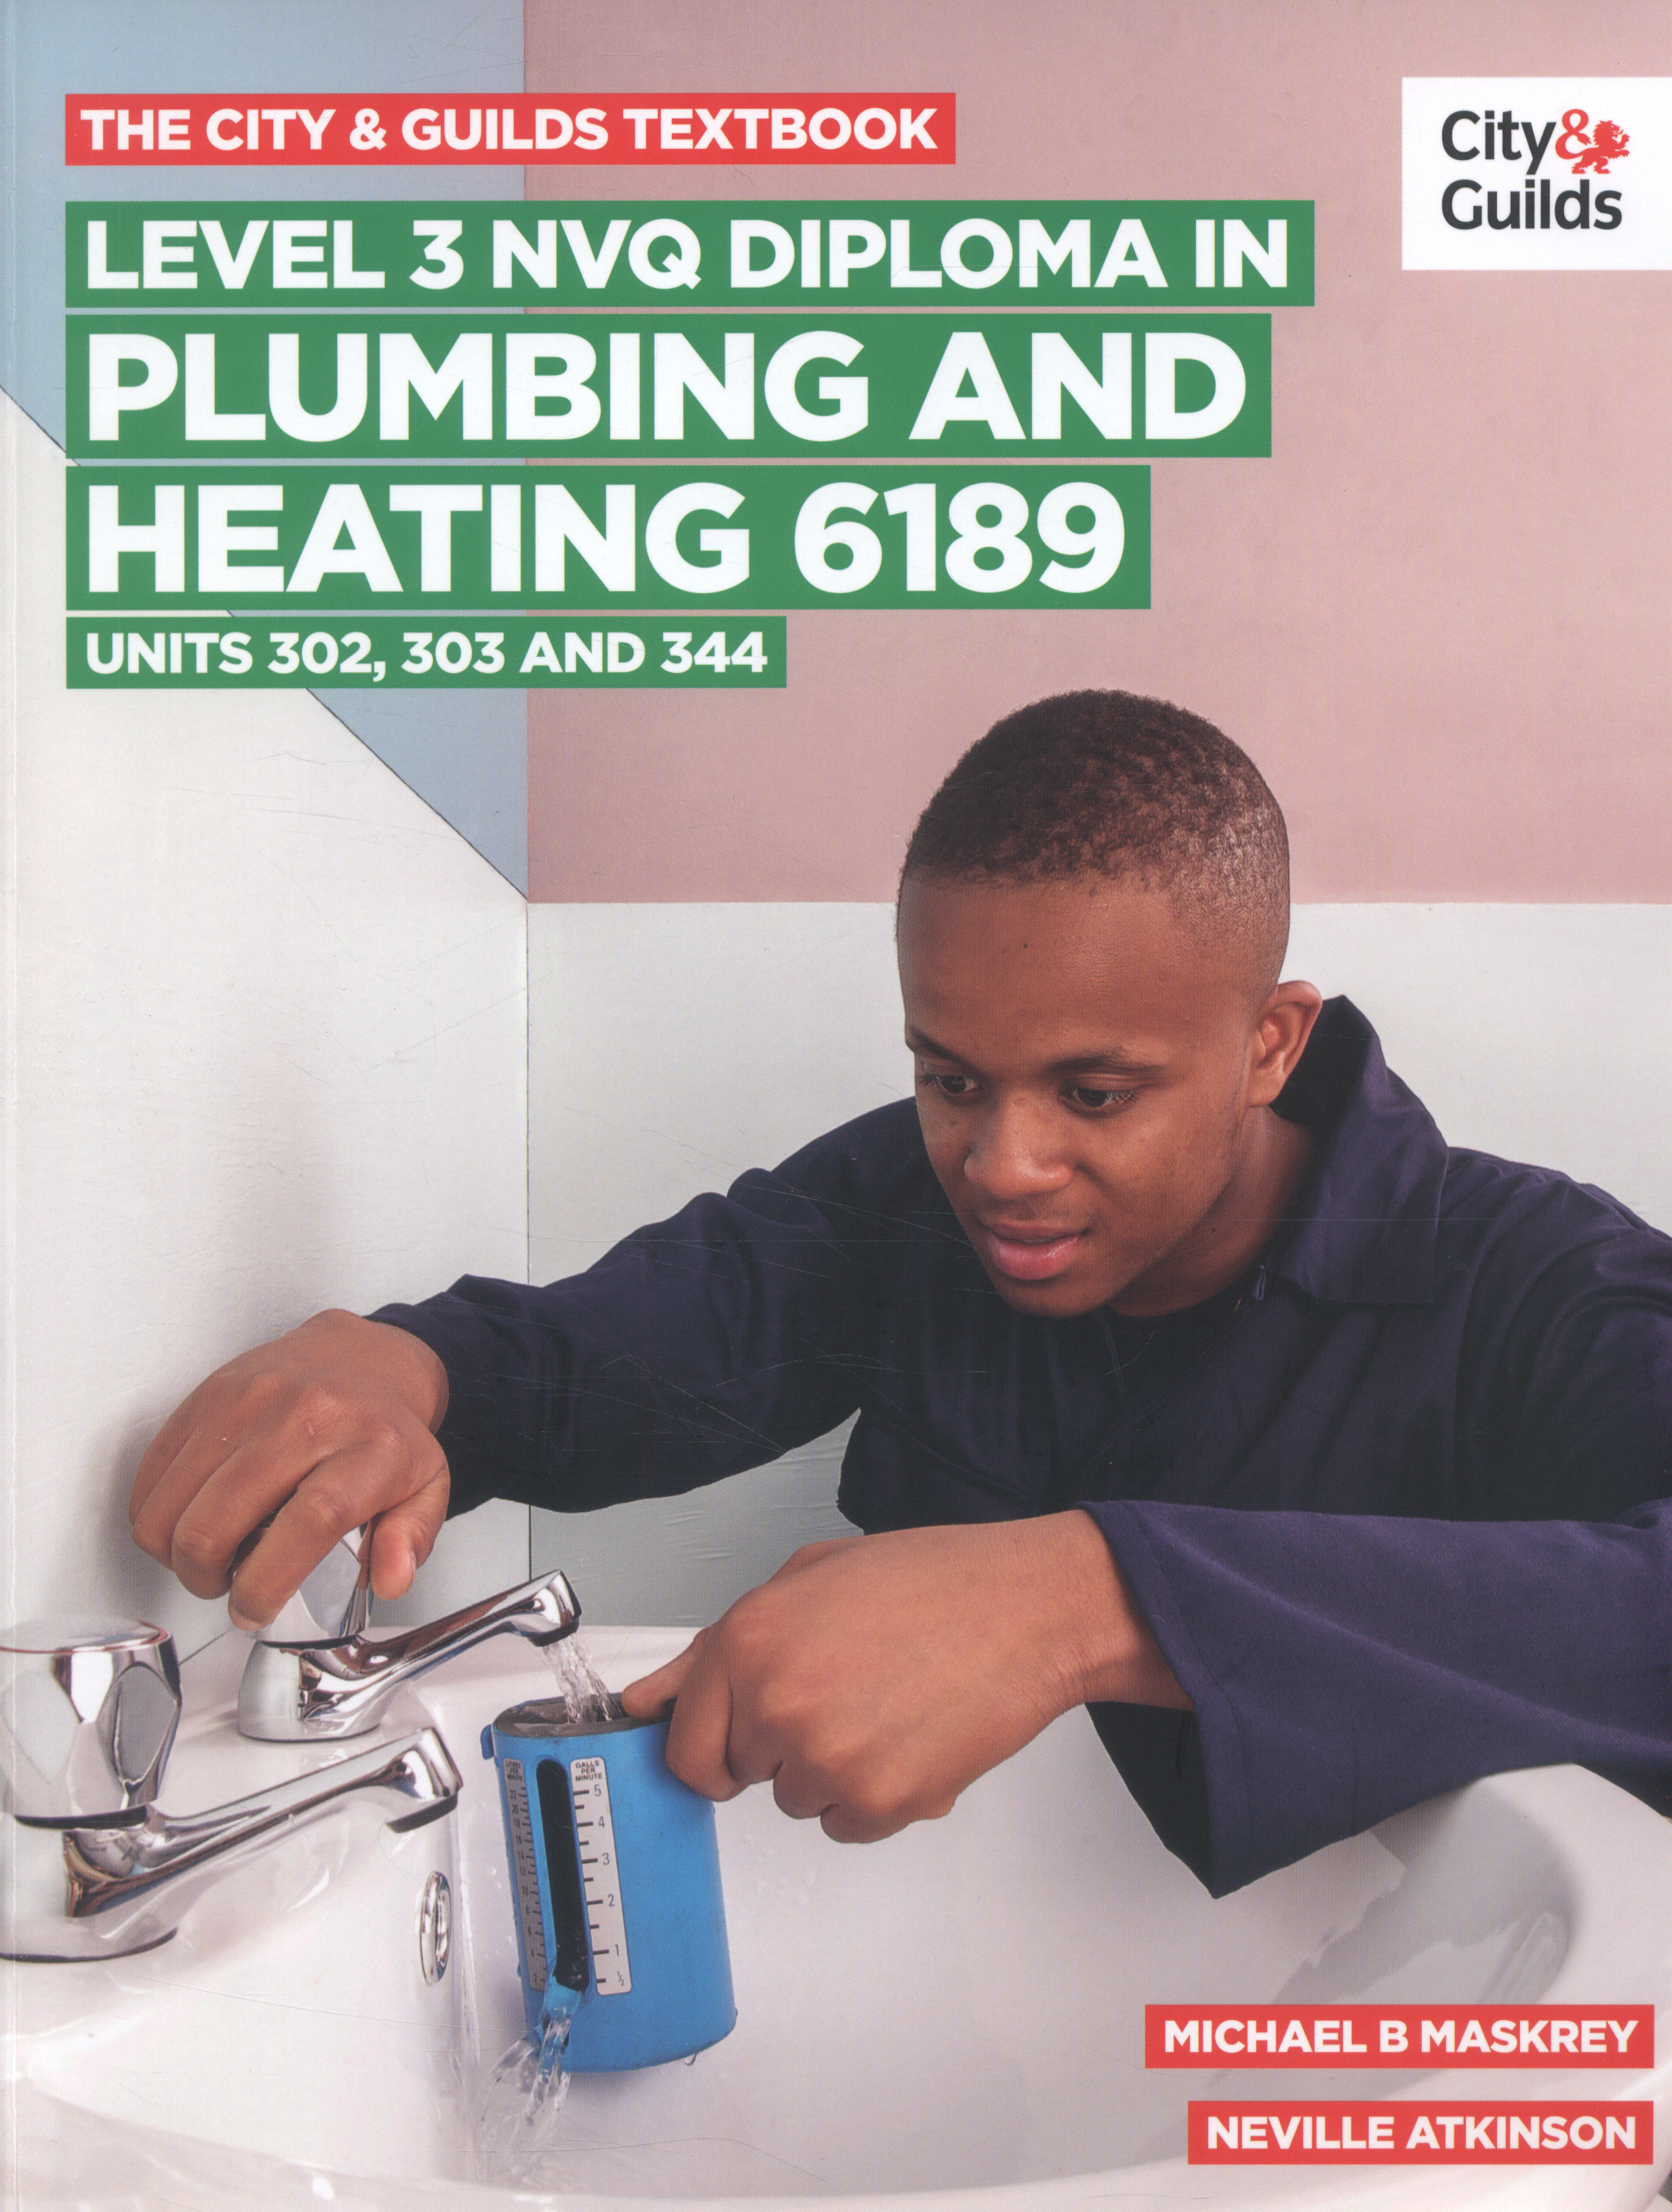 Level 3 NVQ Diploma in Plumbing and Heating 6189 Uni The City & Guilds Textbook 